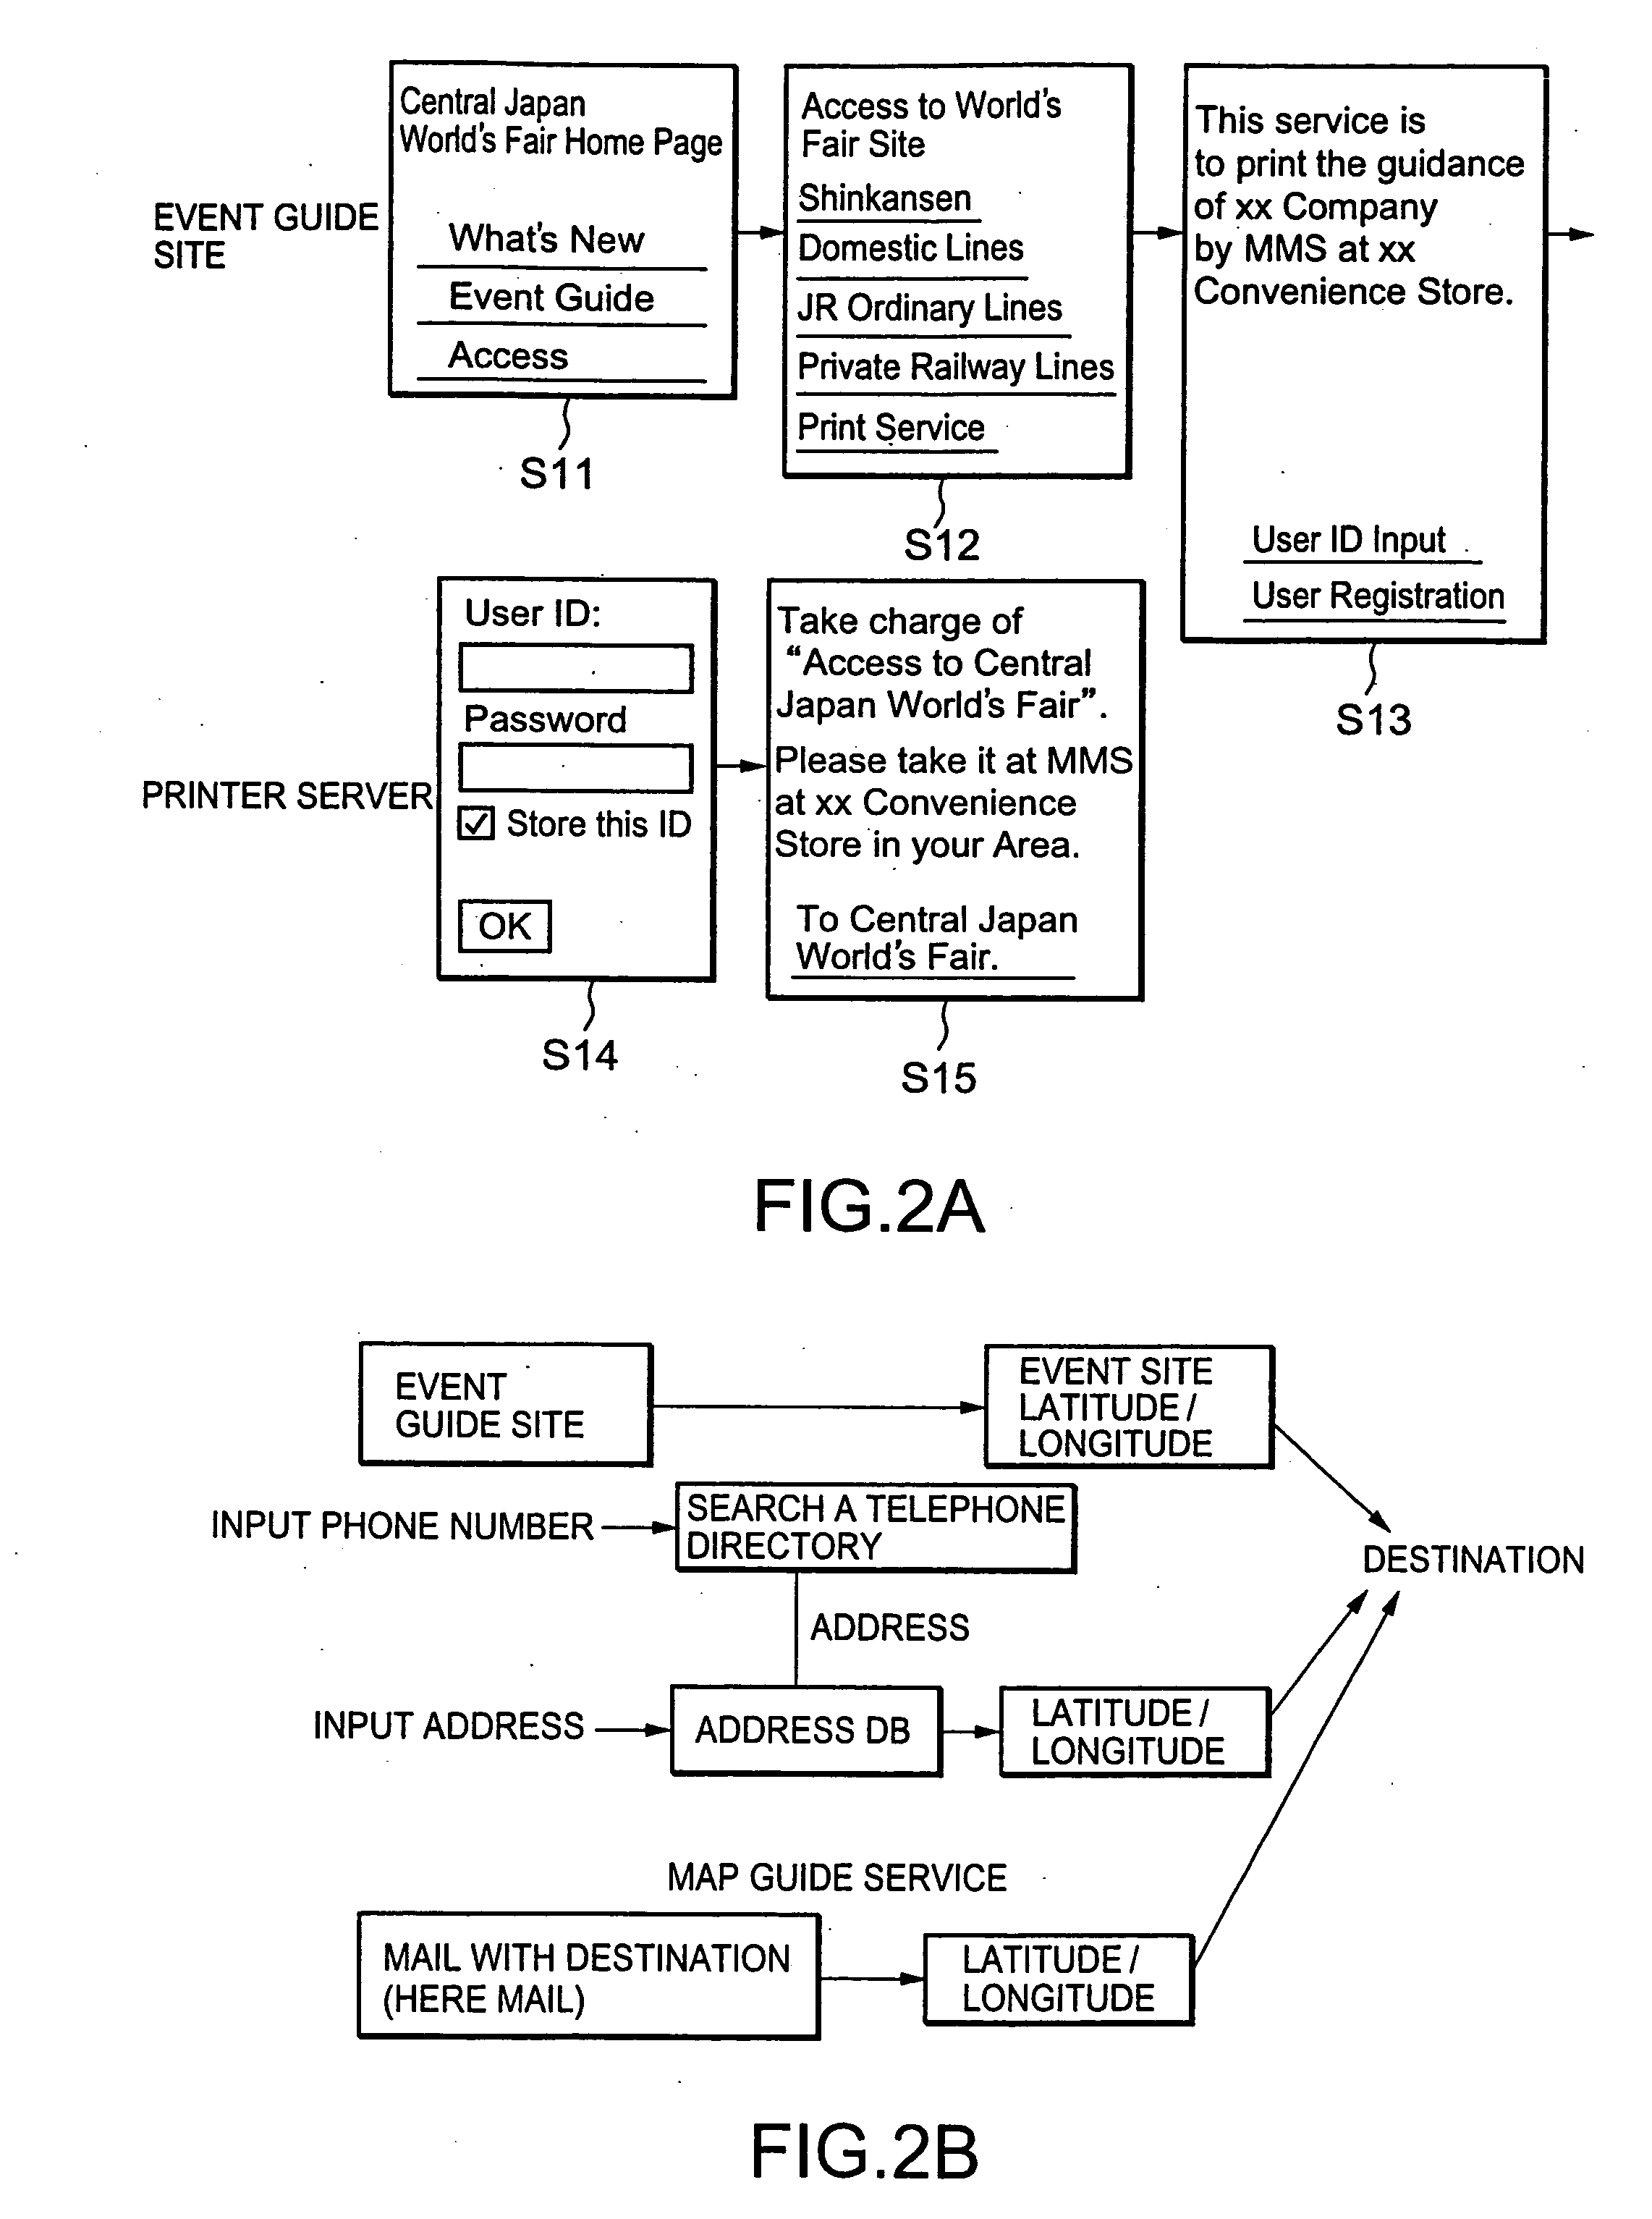 Image forming system and image forming apparatus